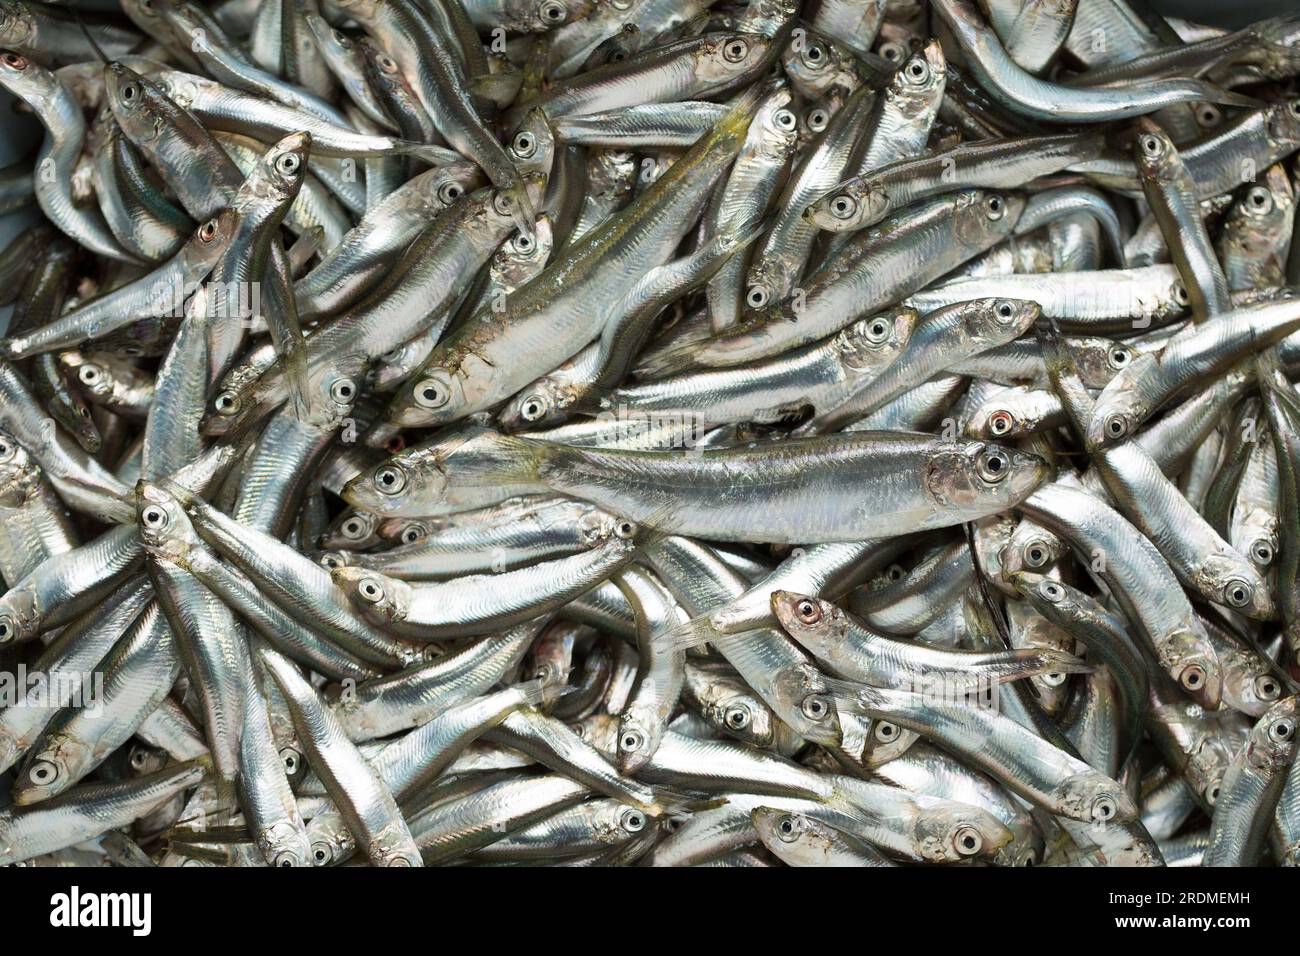 Fresh sprats, Sprattus sprattus, that have been caught in the English Channel that will be deep fried after being coated in flour and paprika.  Sprats Stock Photo